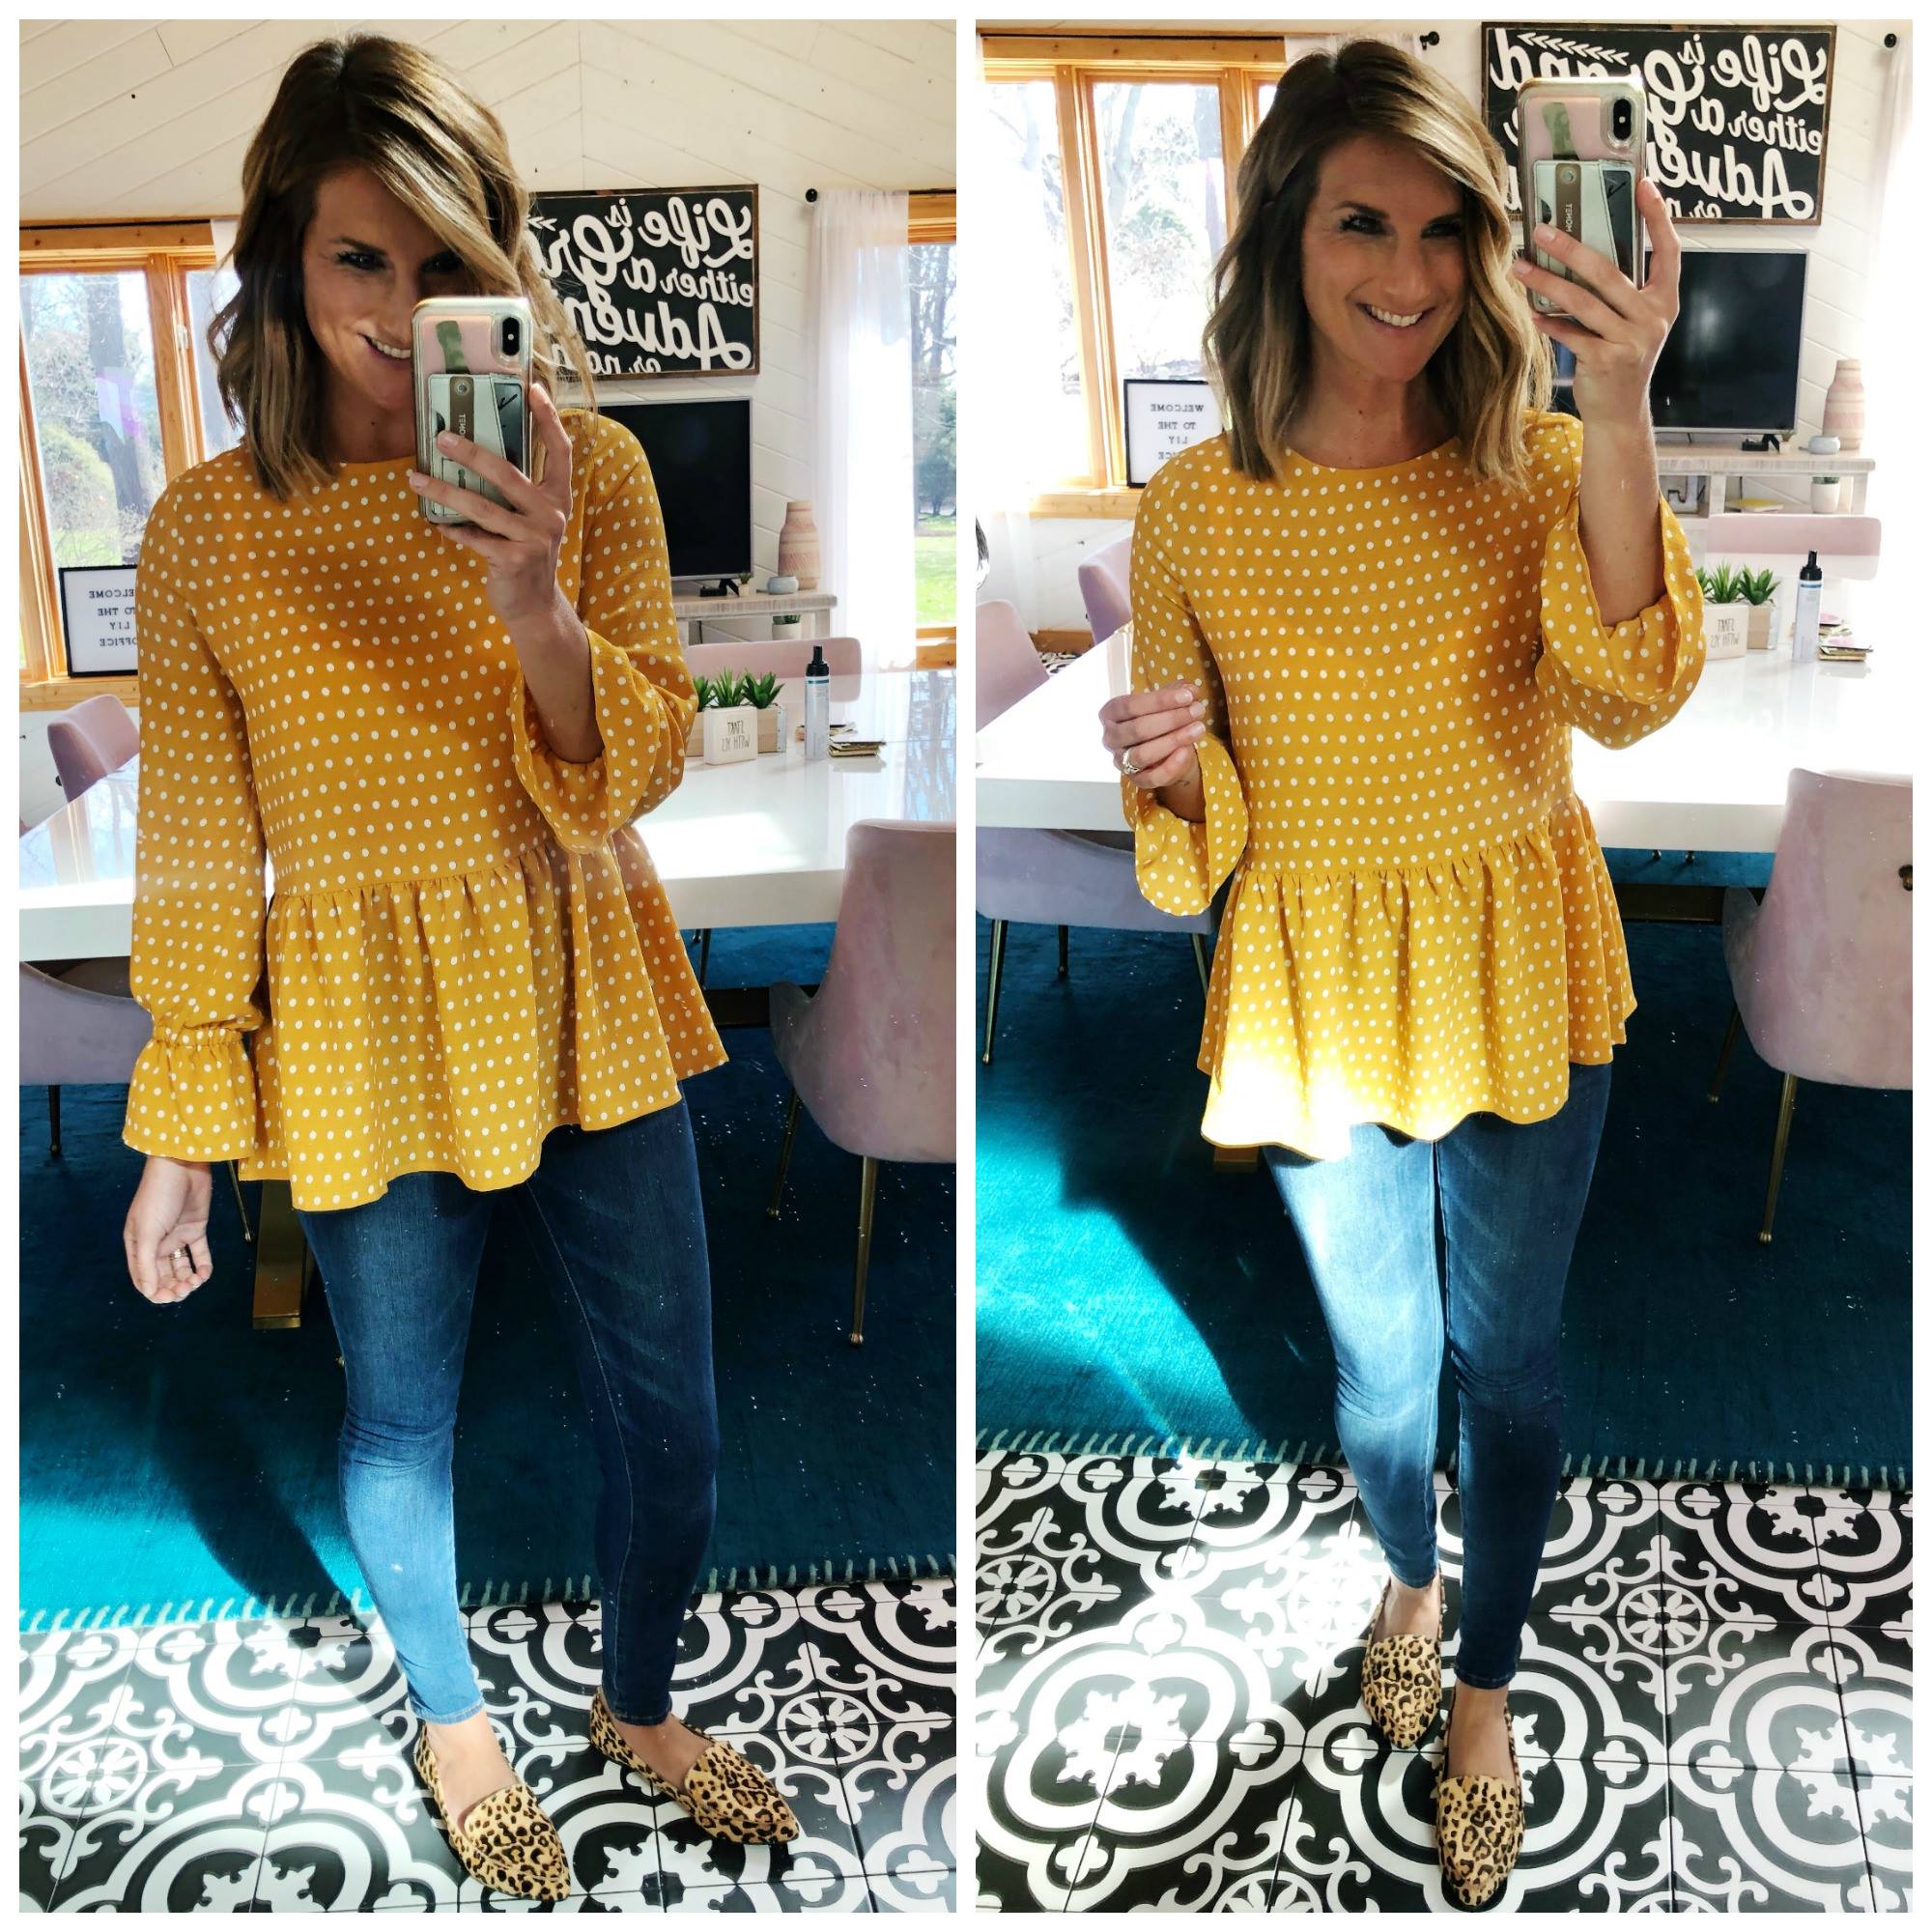 How to style a peplum top // Transitional Outfit // What to wear with leopard flats